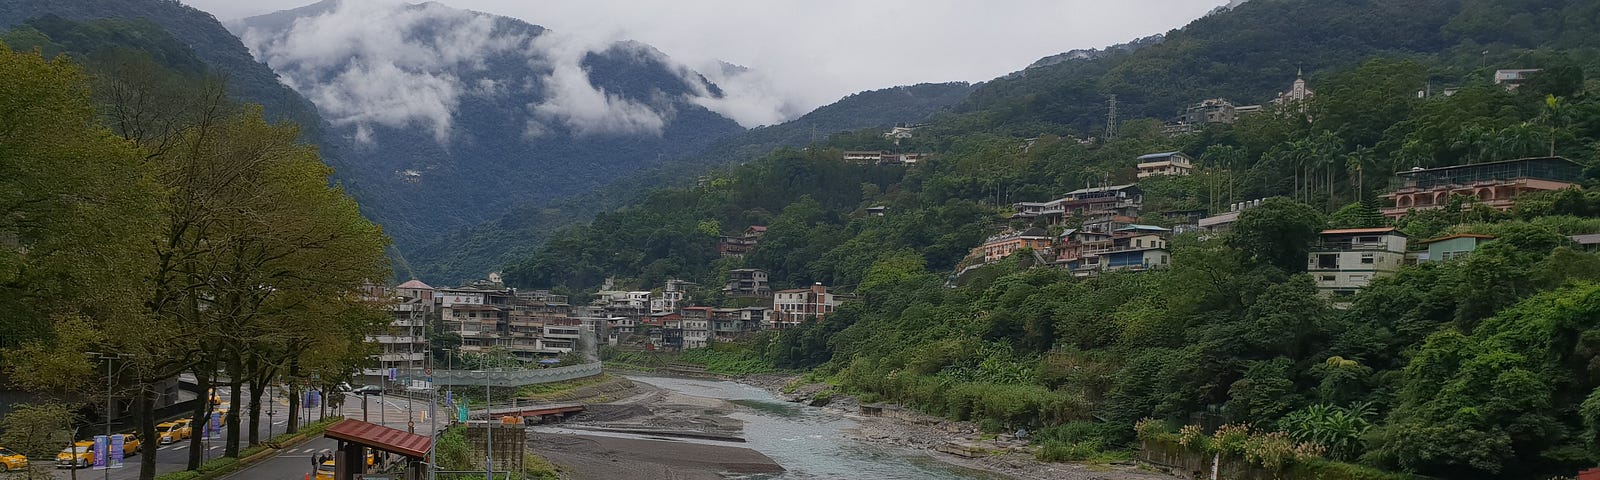 Tourist buses line up along the river’s edge overlooking the mountains and some houses.